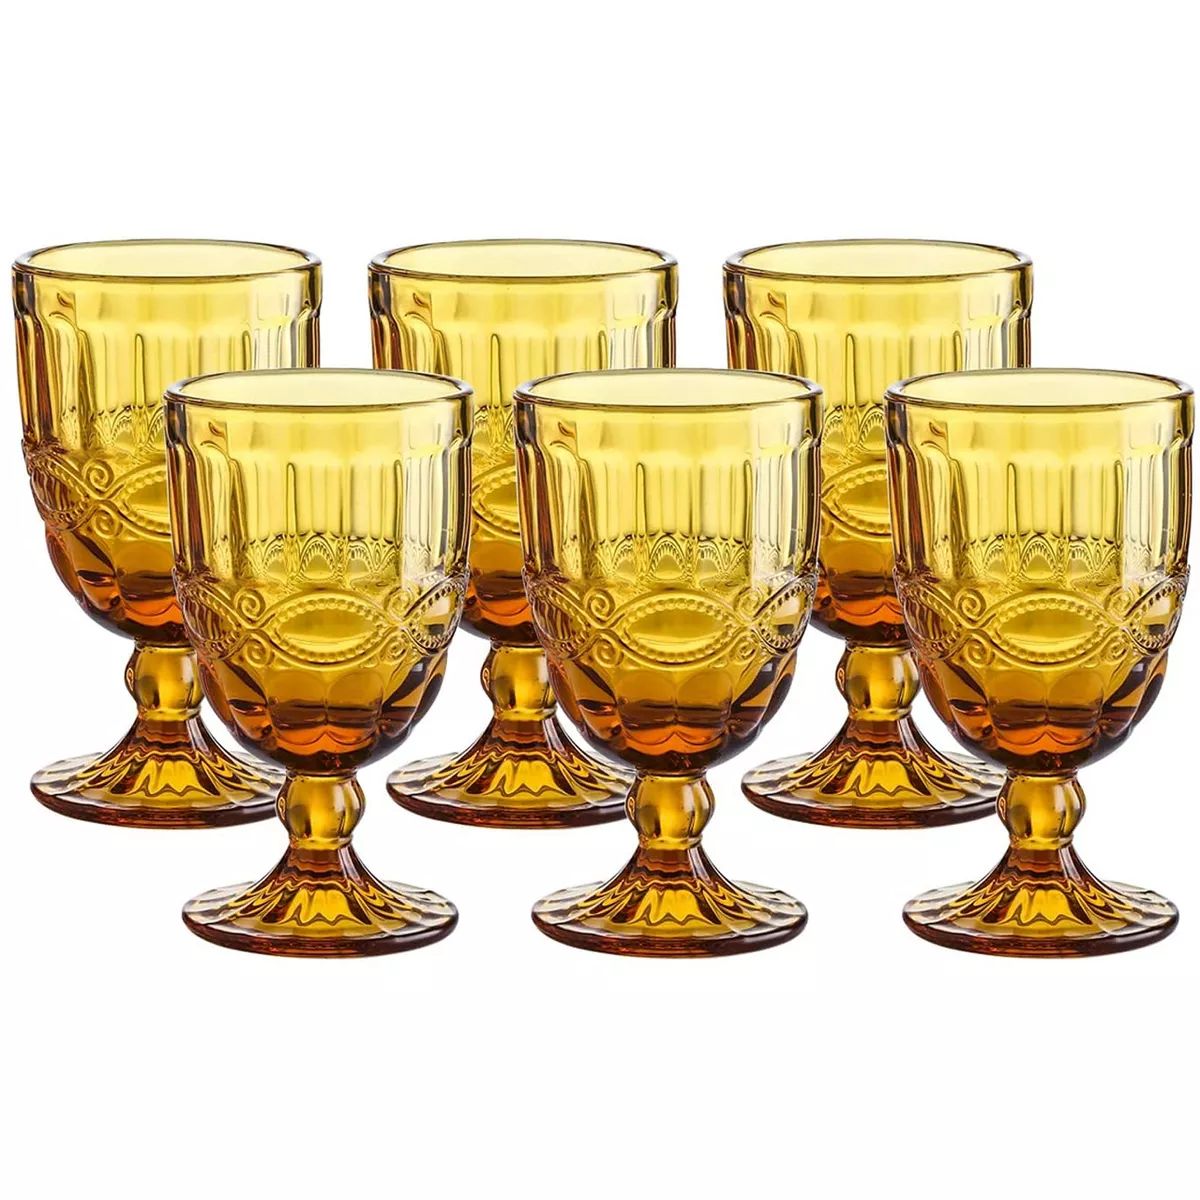 Whole Houseware 8.7 Oz Colored Amber Drinking Glasses Pressed Pattern with Stem Set of 6, Amber | Target